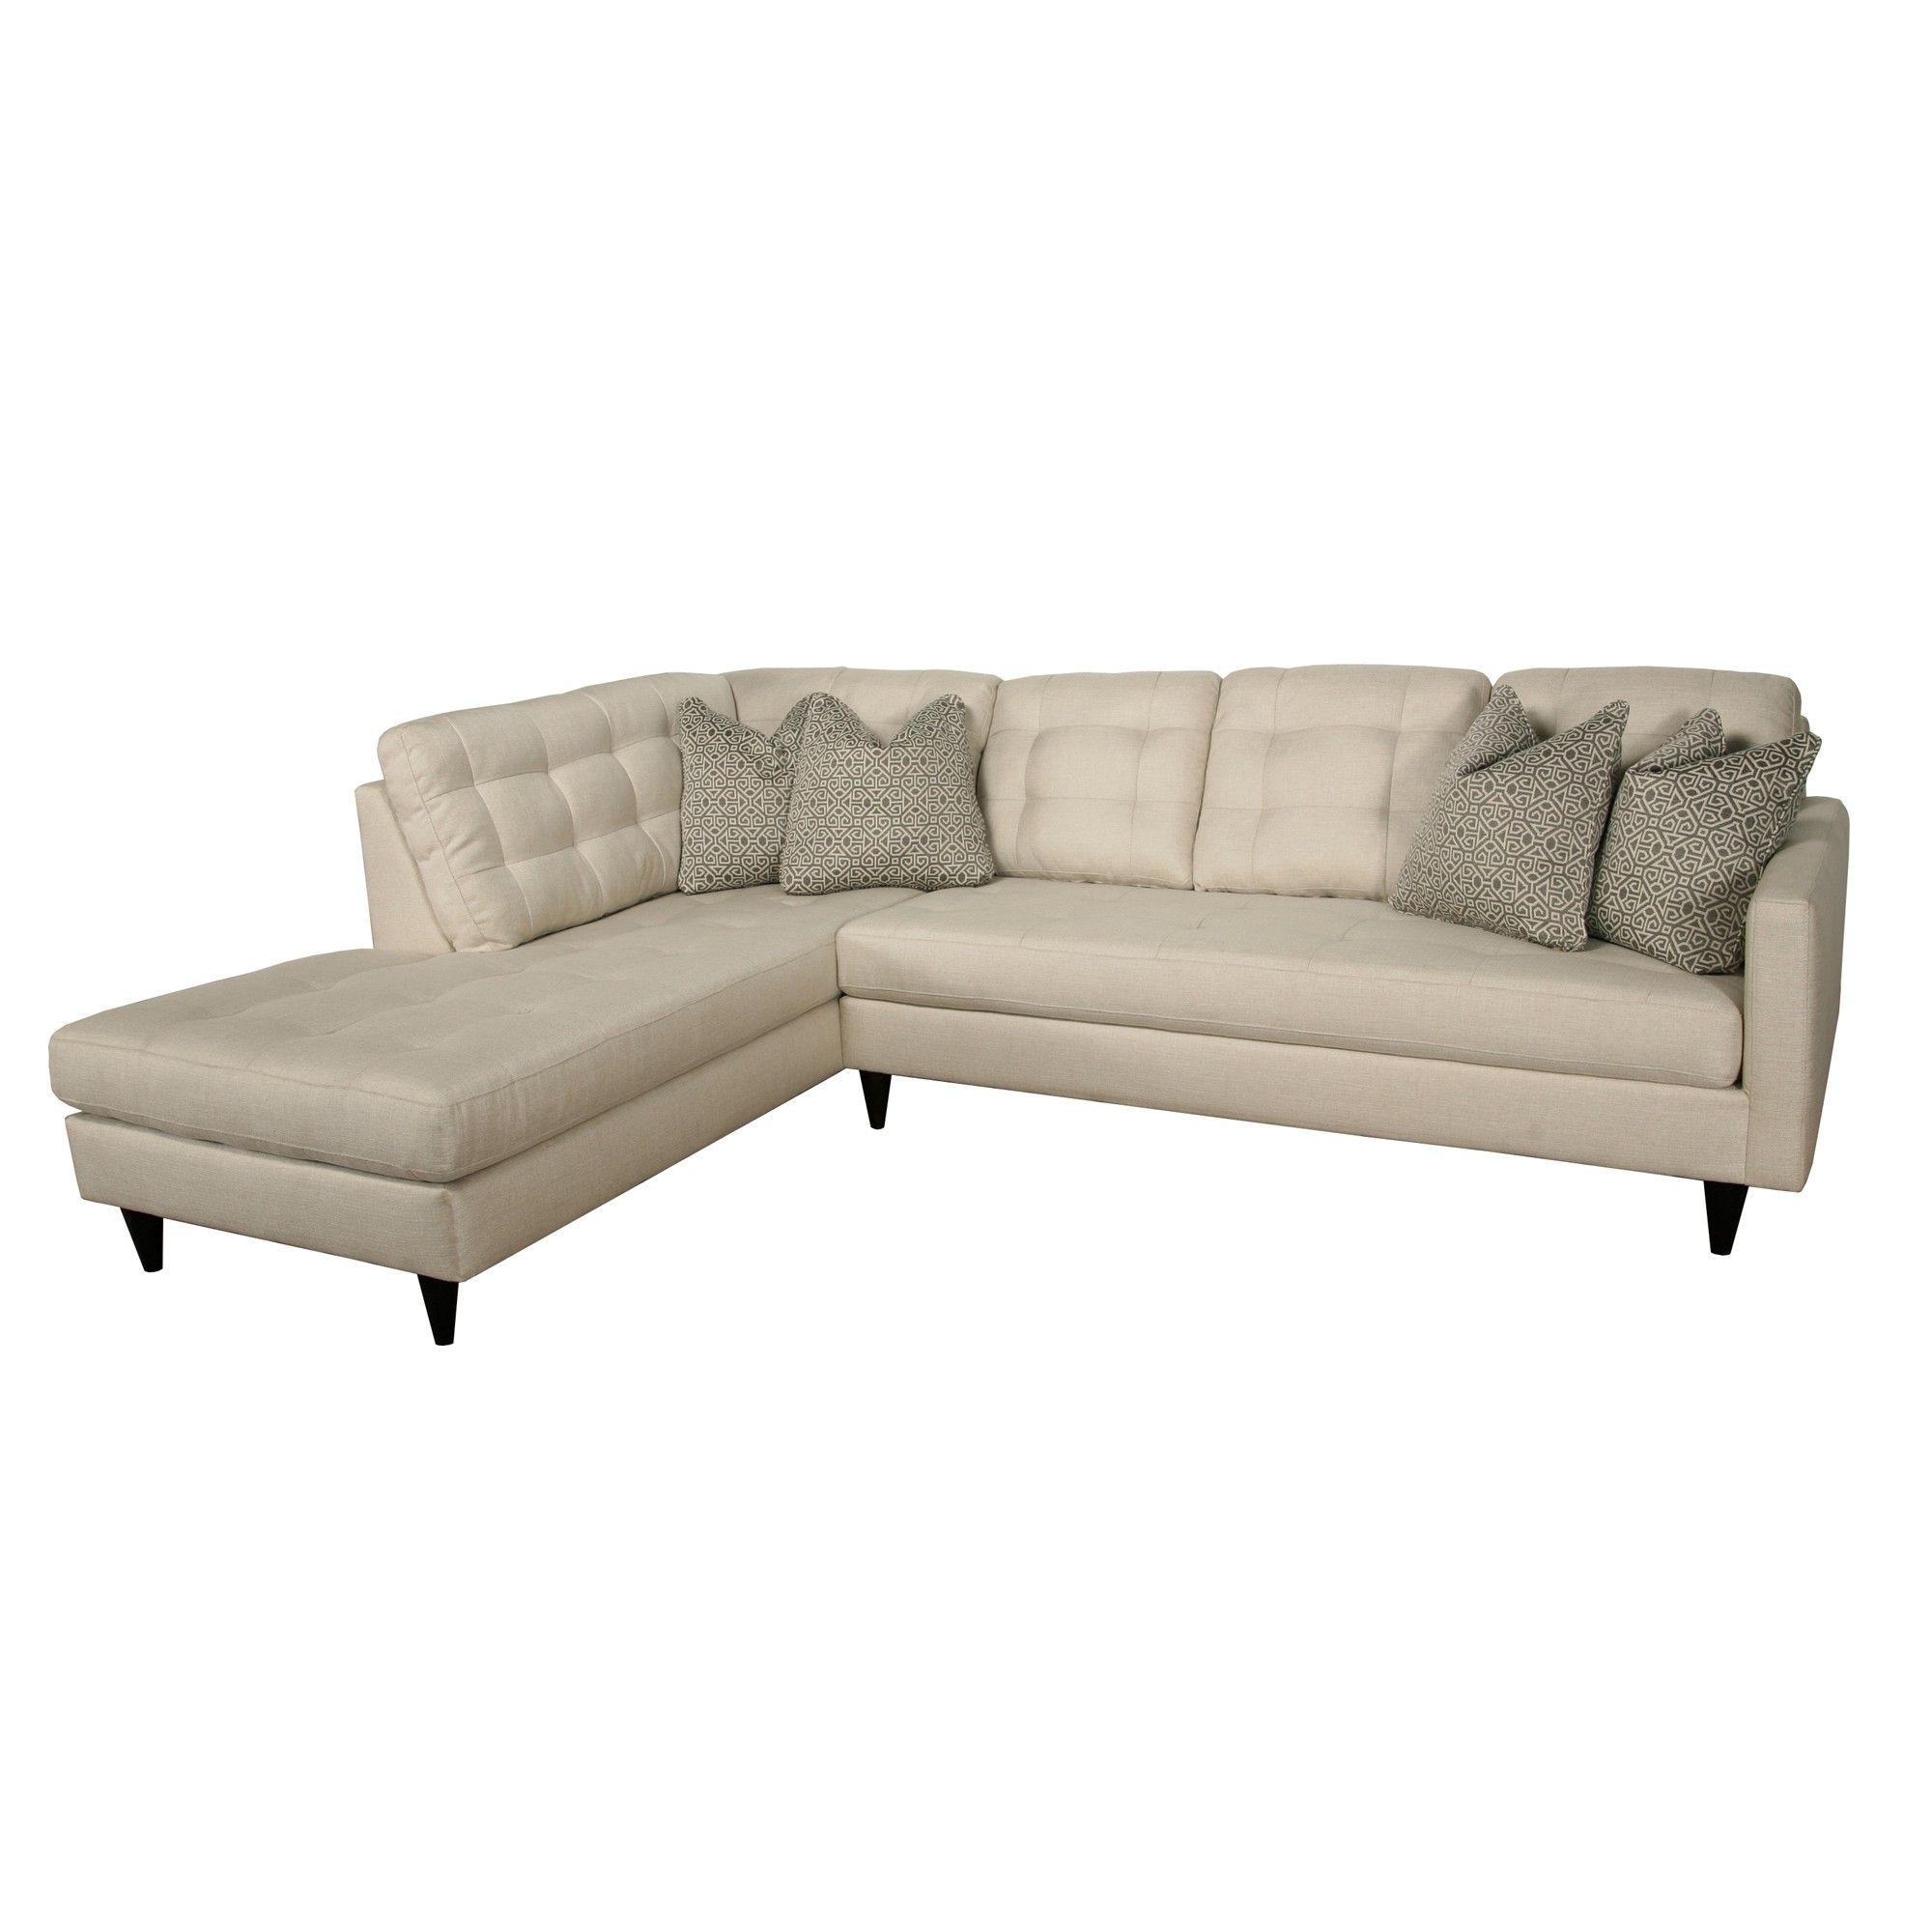 Bevan 2 Piece Sectional (View 19 of 20)